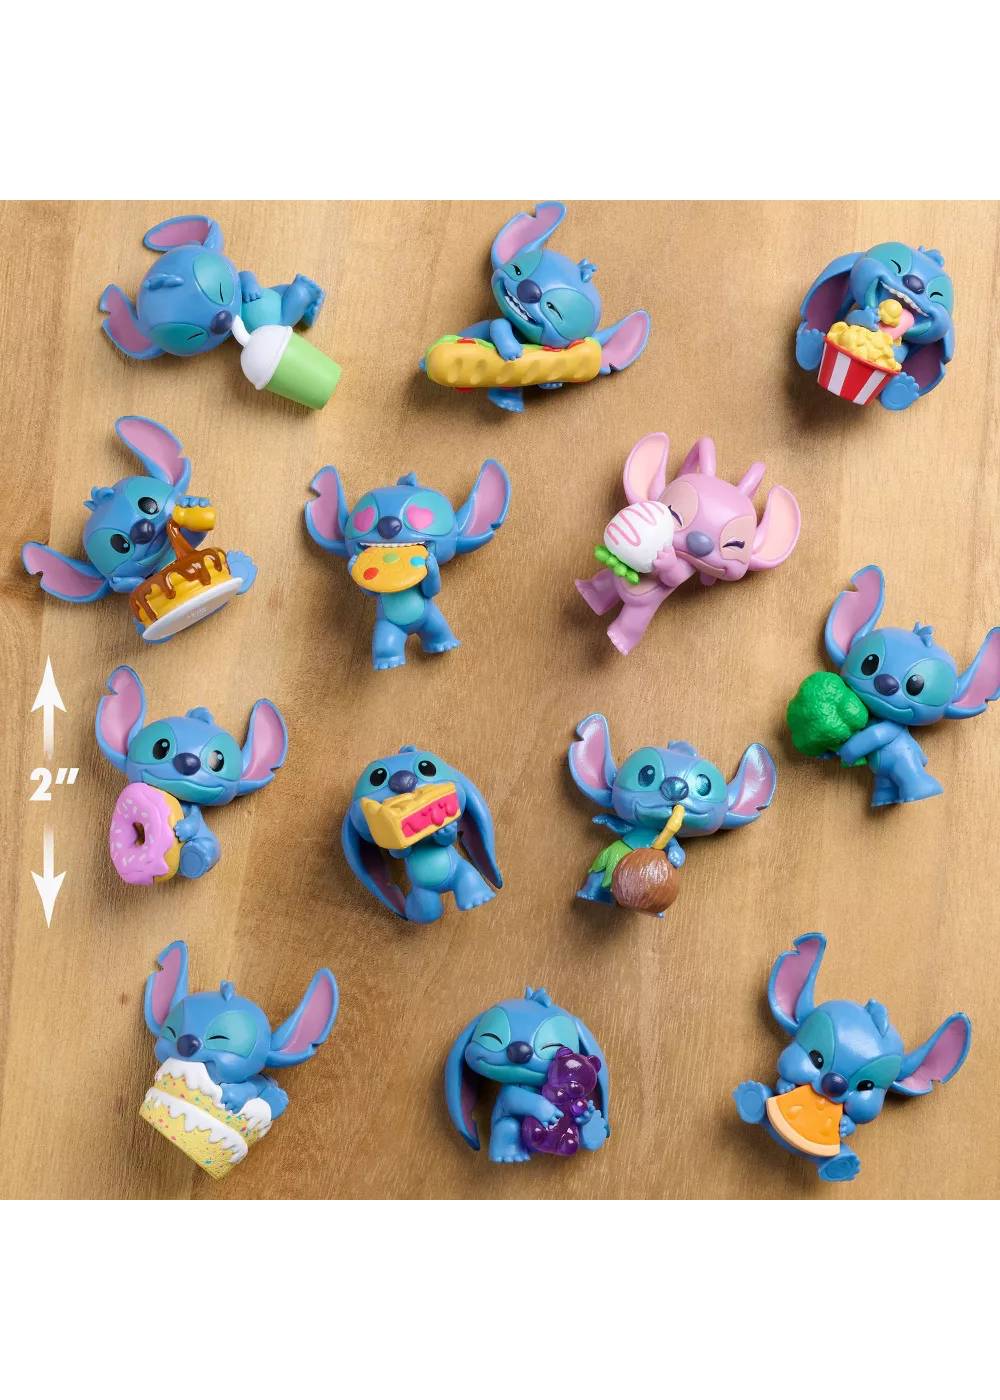 Just Play Disney Stitch Collectible Mini Figure Capsule - Series 3; image 3 of 5